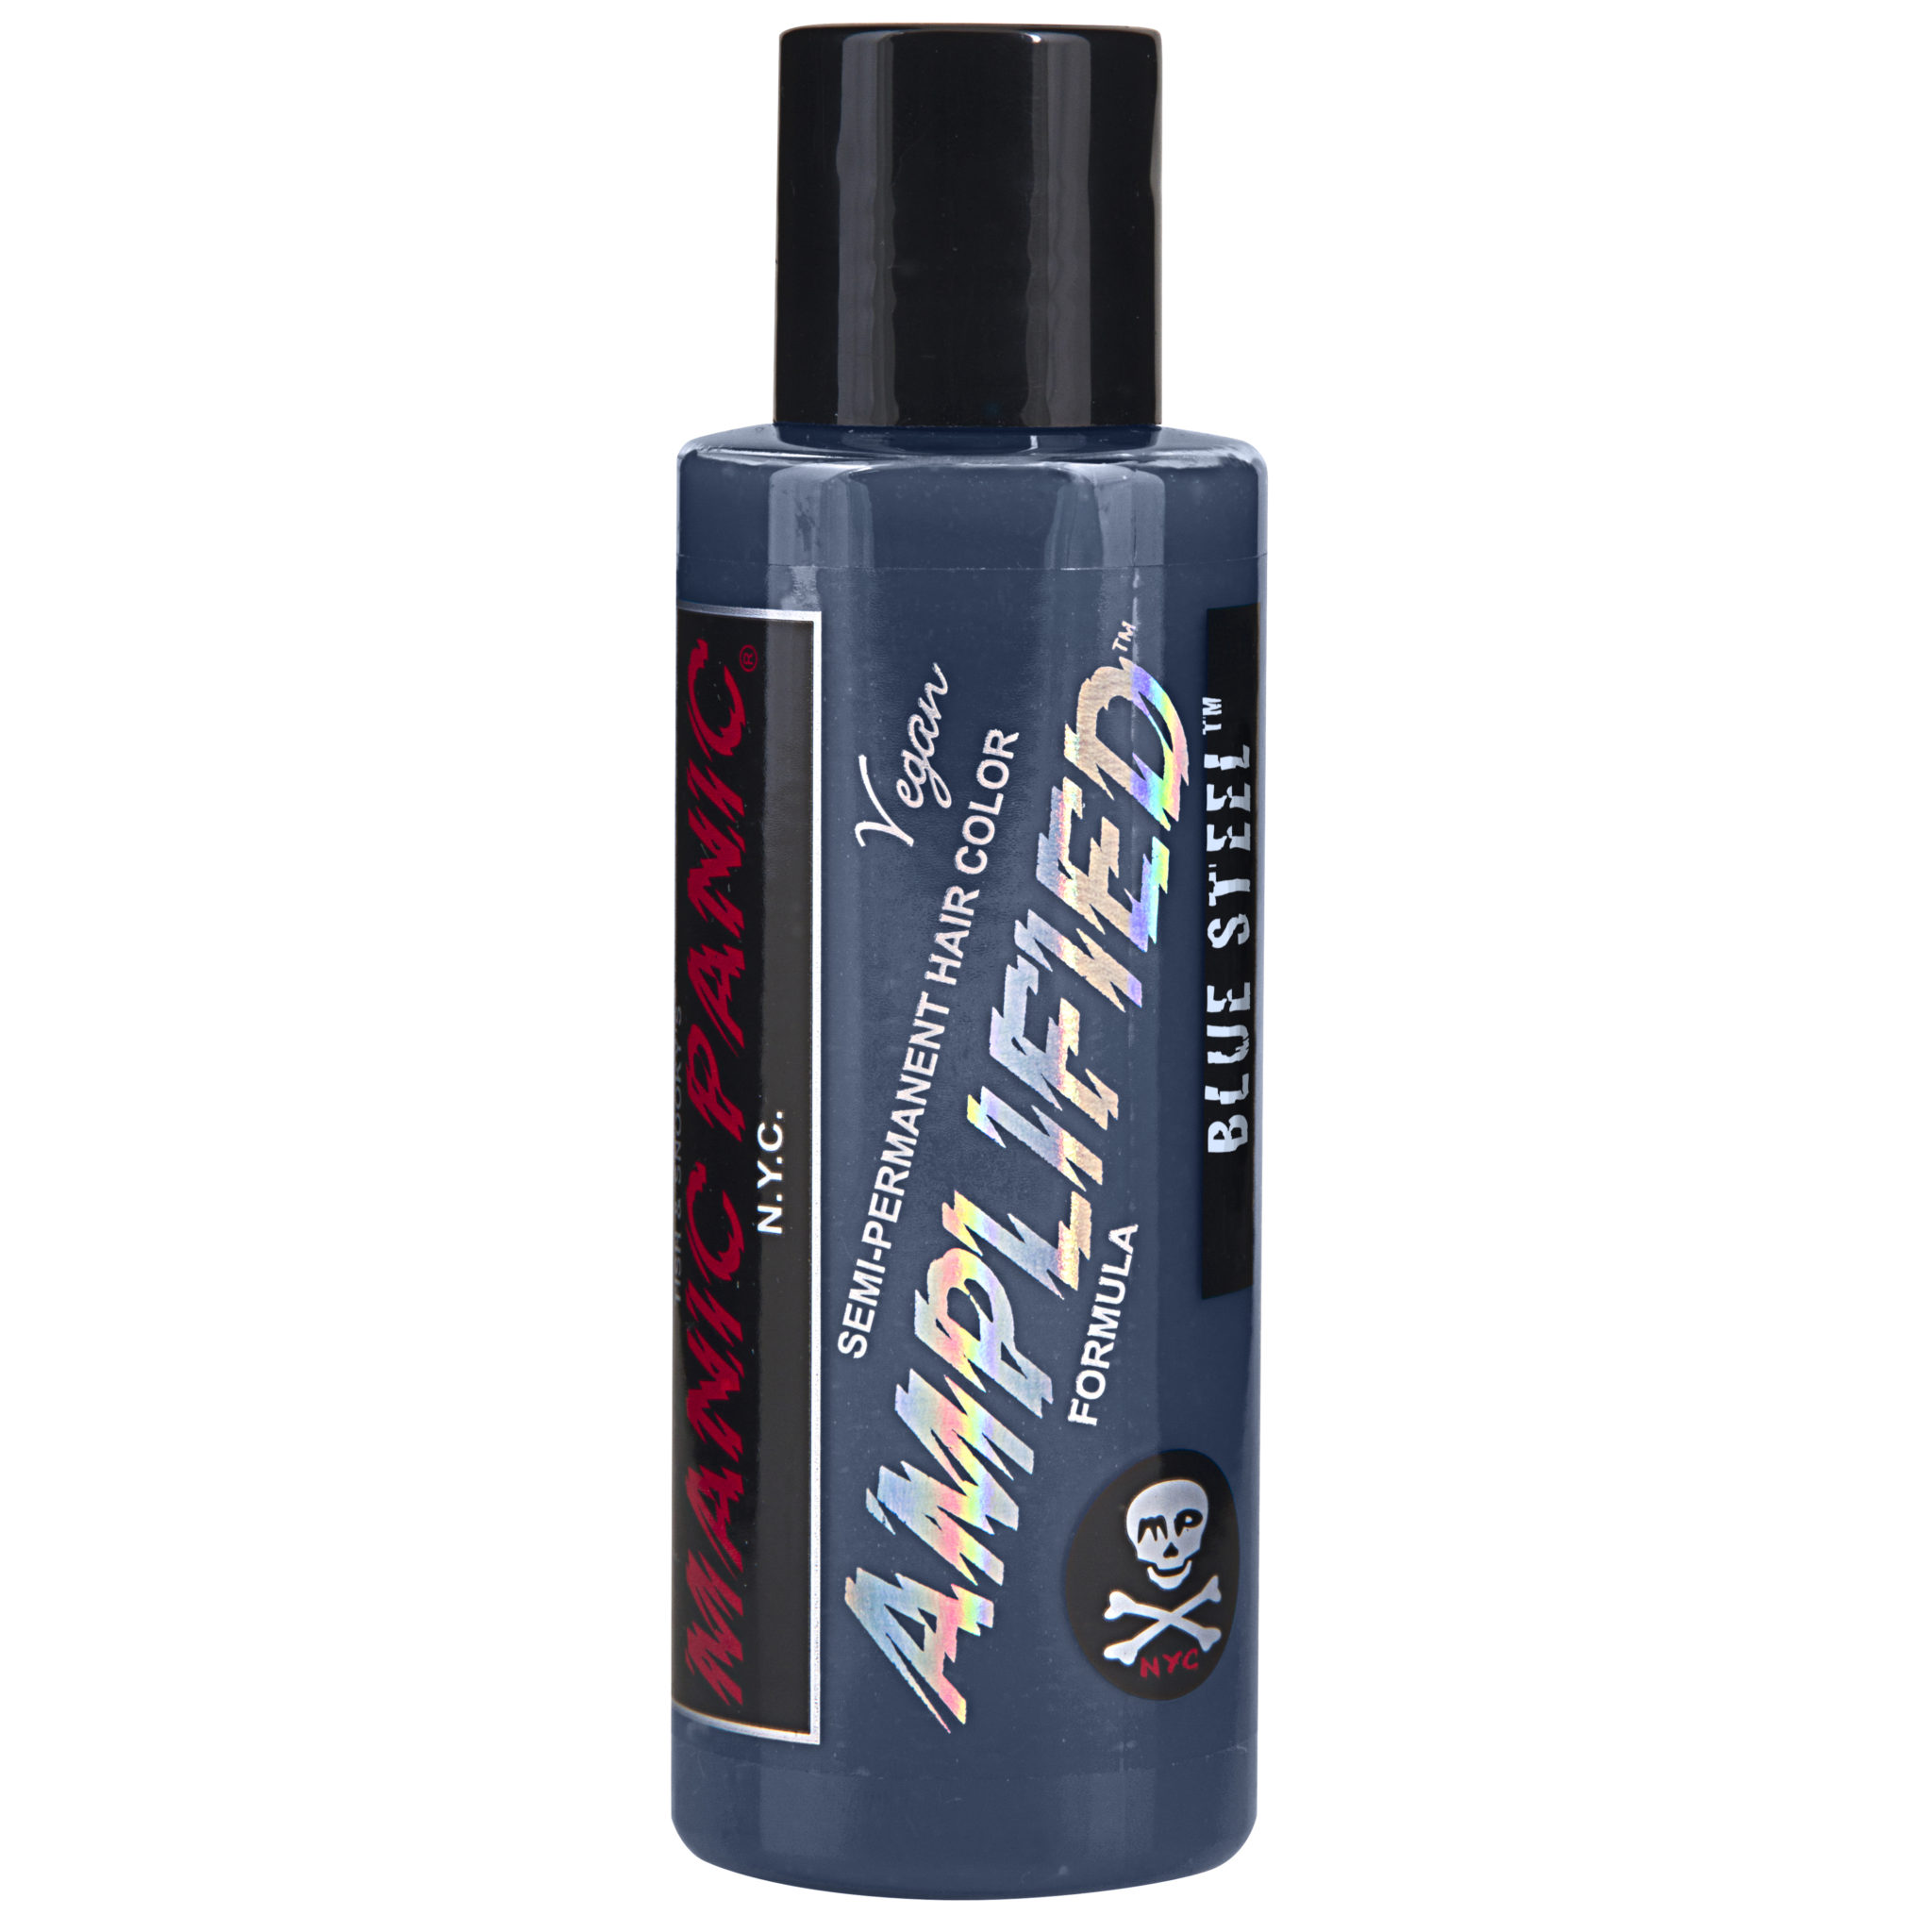 Manic Panic Blue Steel Amplified - Hair products Australia | Nation wide  hair care group